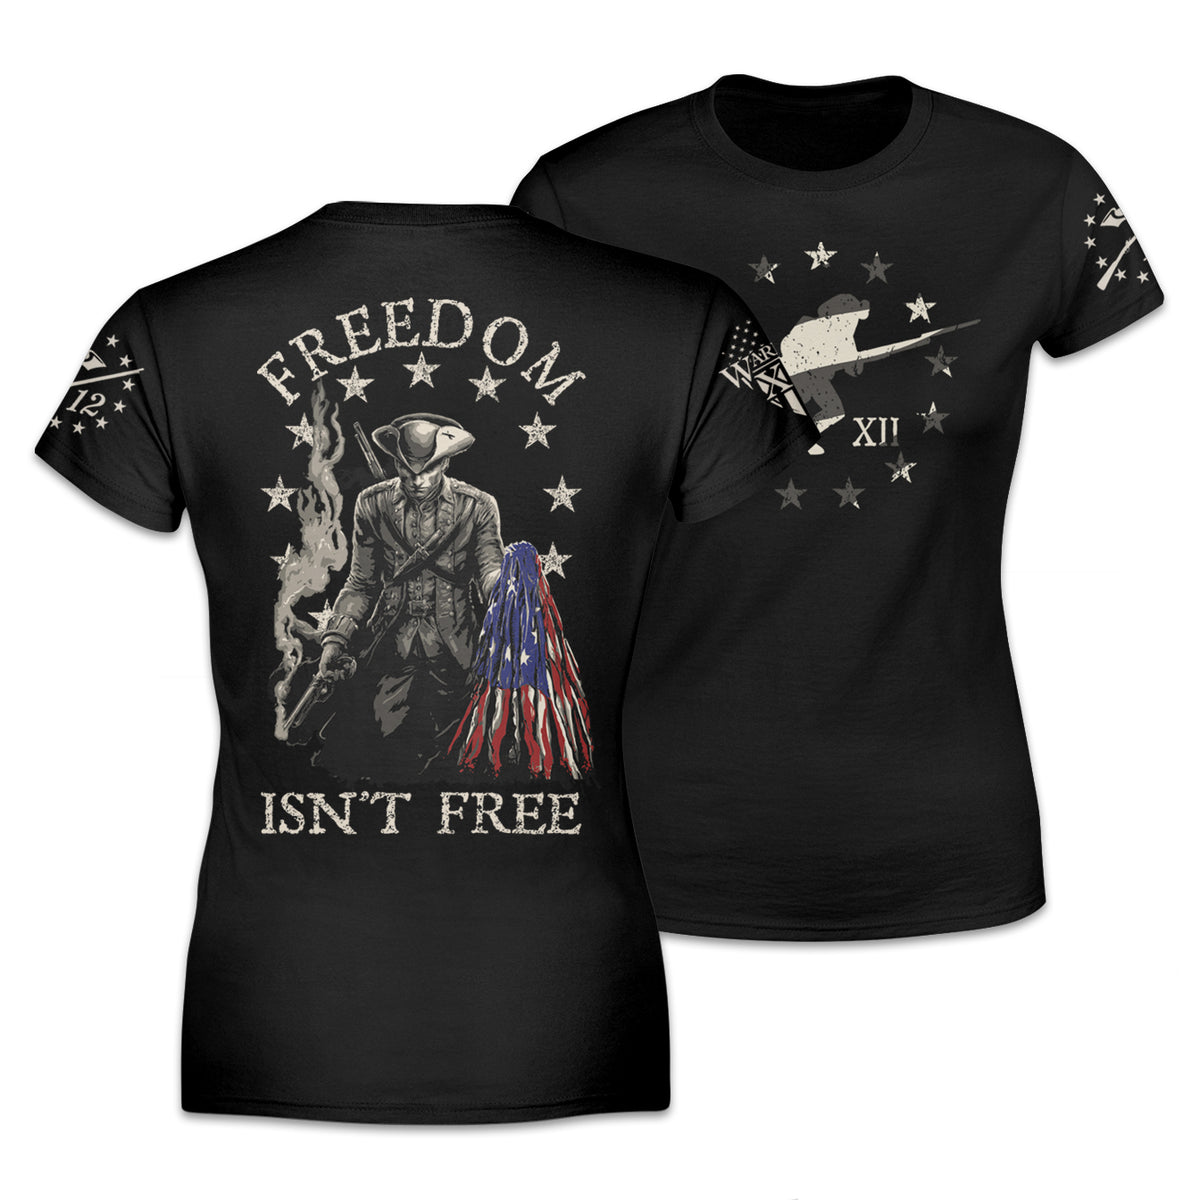 Front & back black women's relaxed fit shirt pays tribute to the Minuteman, the original American Patriot, and our forefathers who fought relentlessly against the tyranny of Britain.The back of the shirt has an infaltry soldier holding a ripped USA flag printed on it.